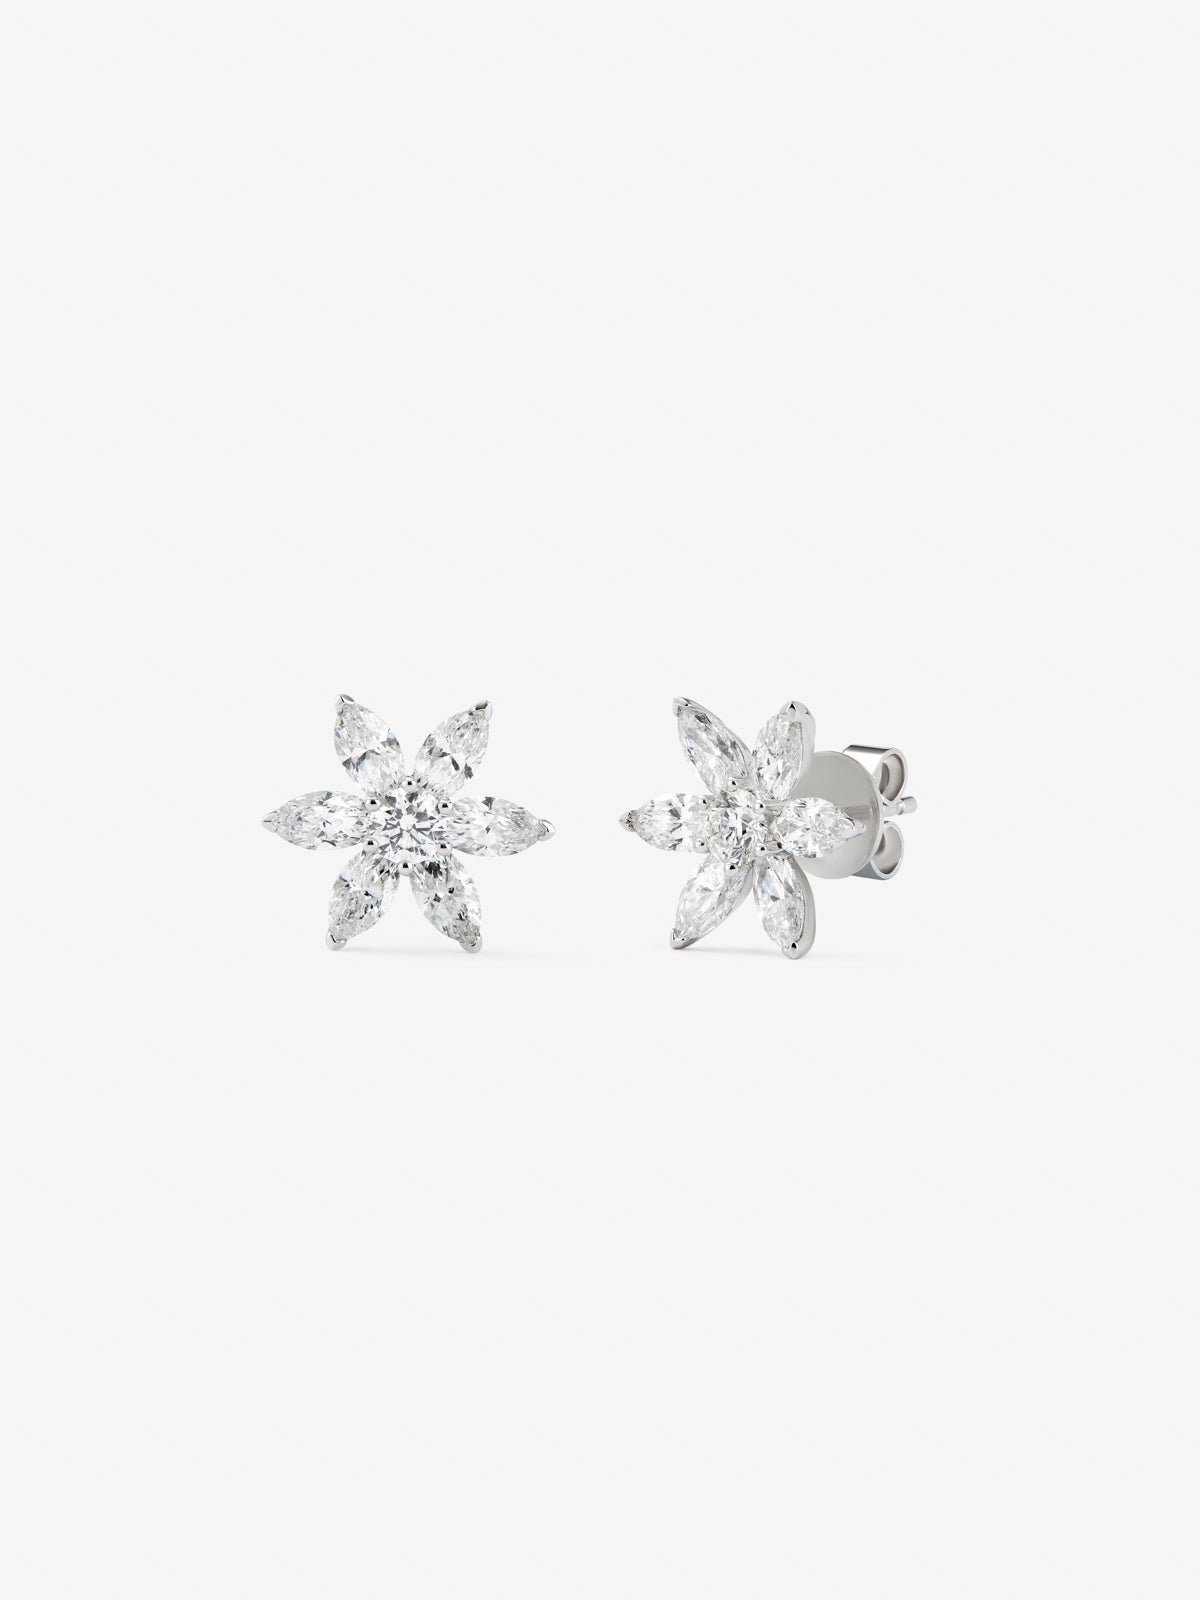 18K white gold earrings with 2 brilliant-cut diamonds with a total of 0.35 cts and 12 marquise-cut diamonds with a total of 1.9 cts